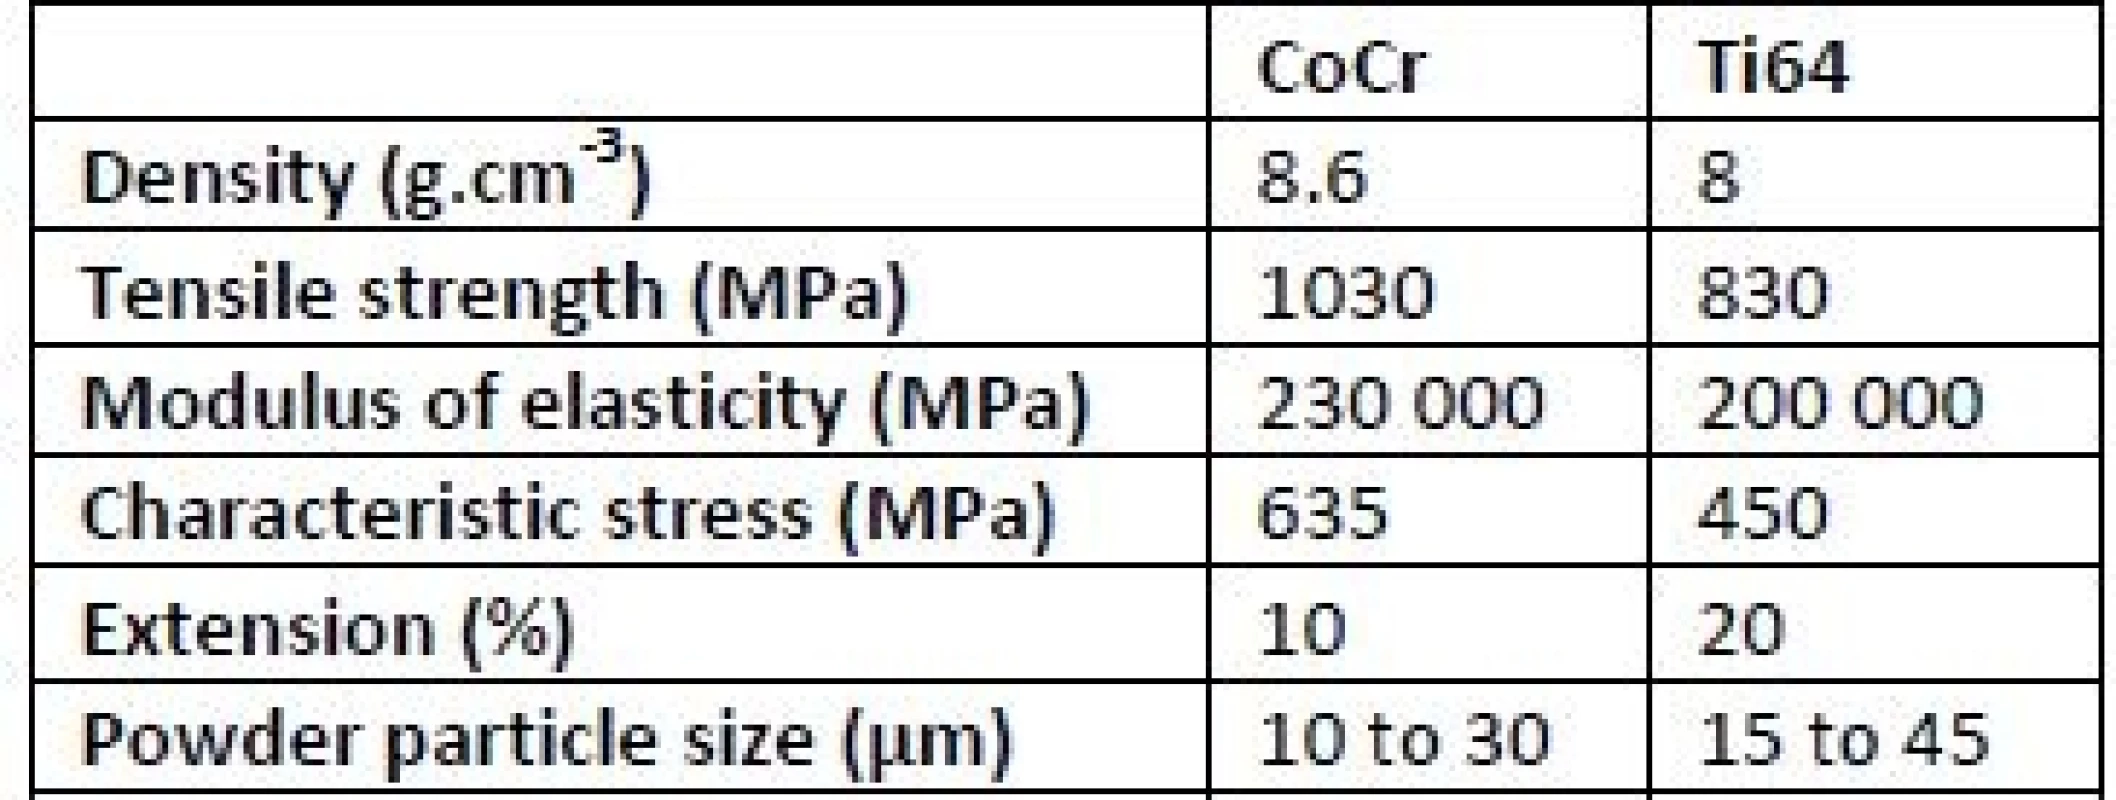 Mechanical properties of CoCr and Ti64.